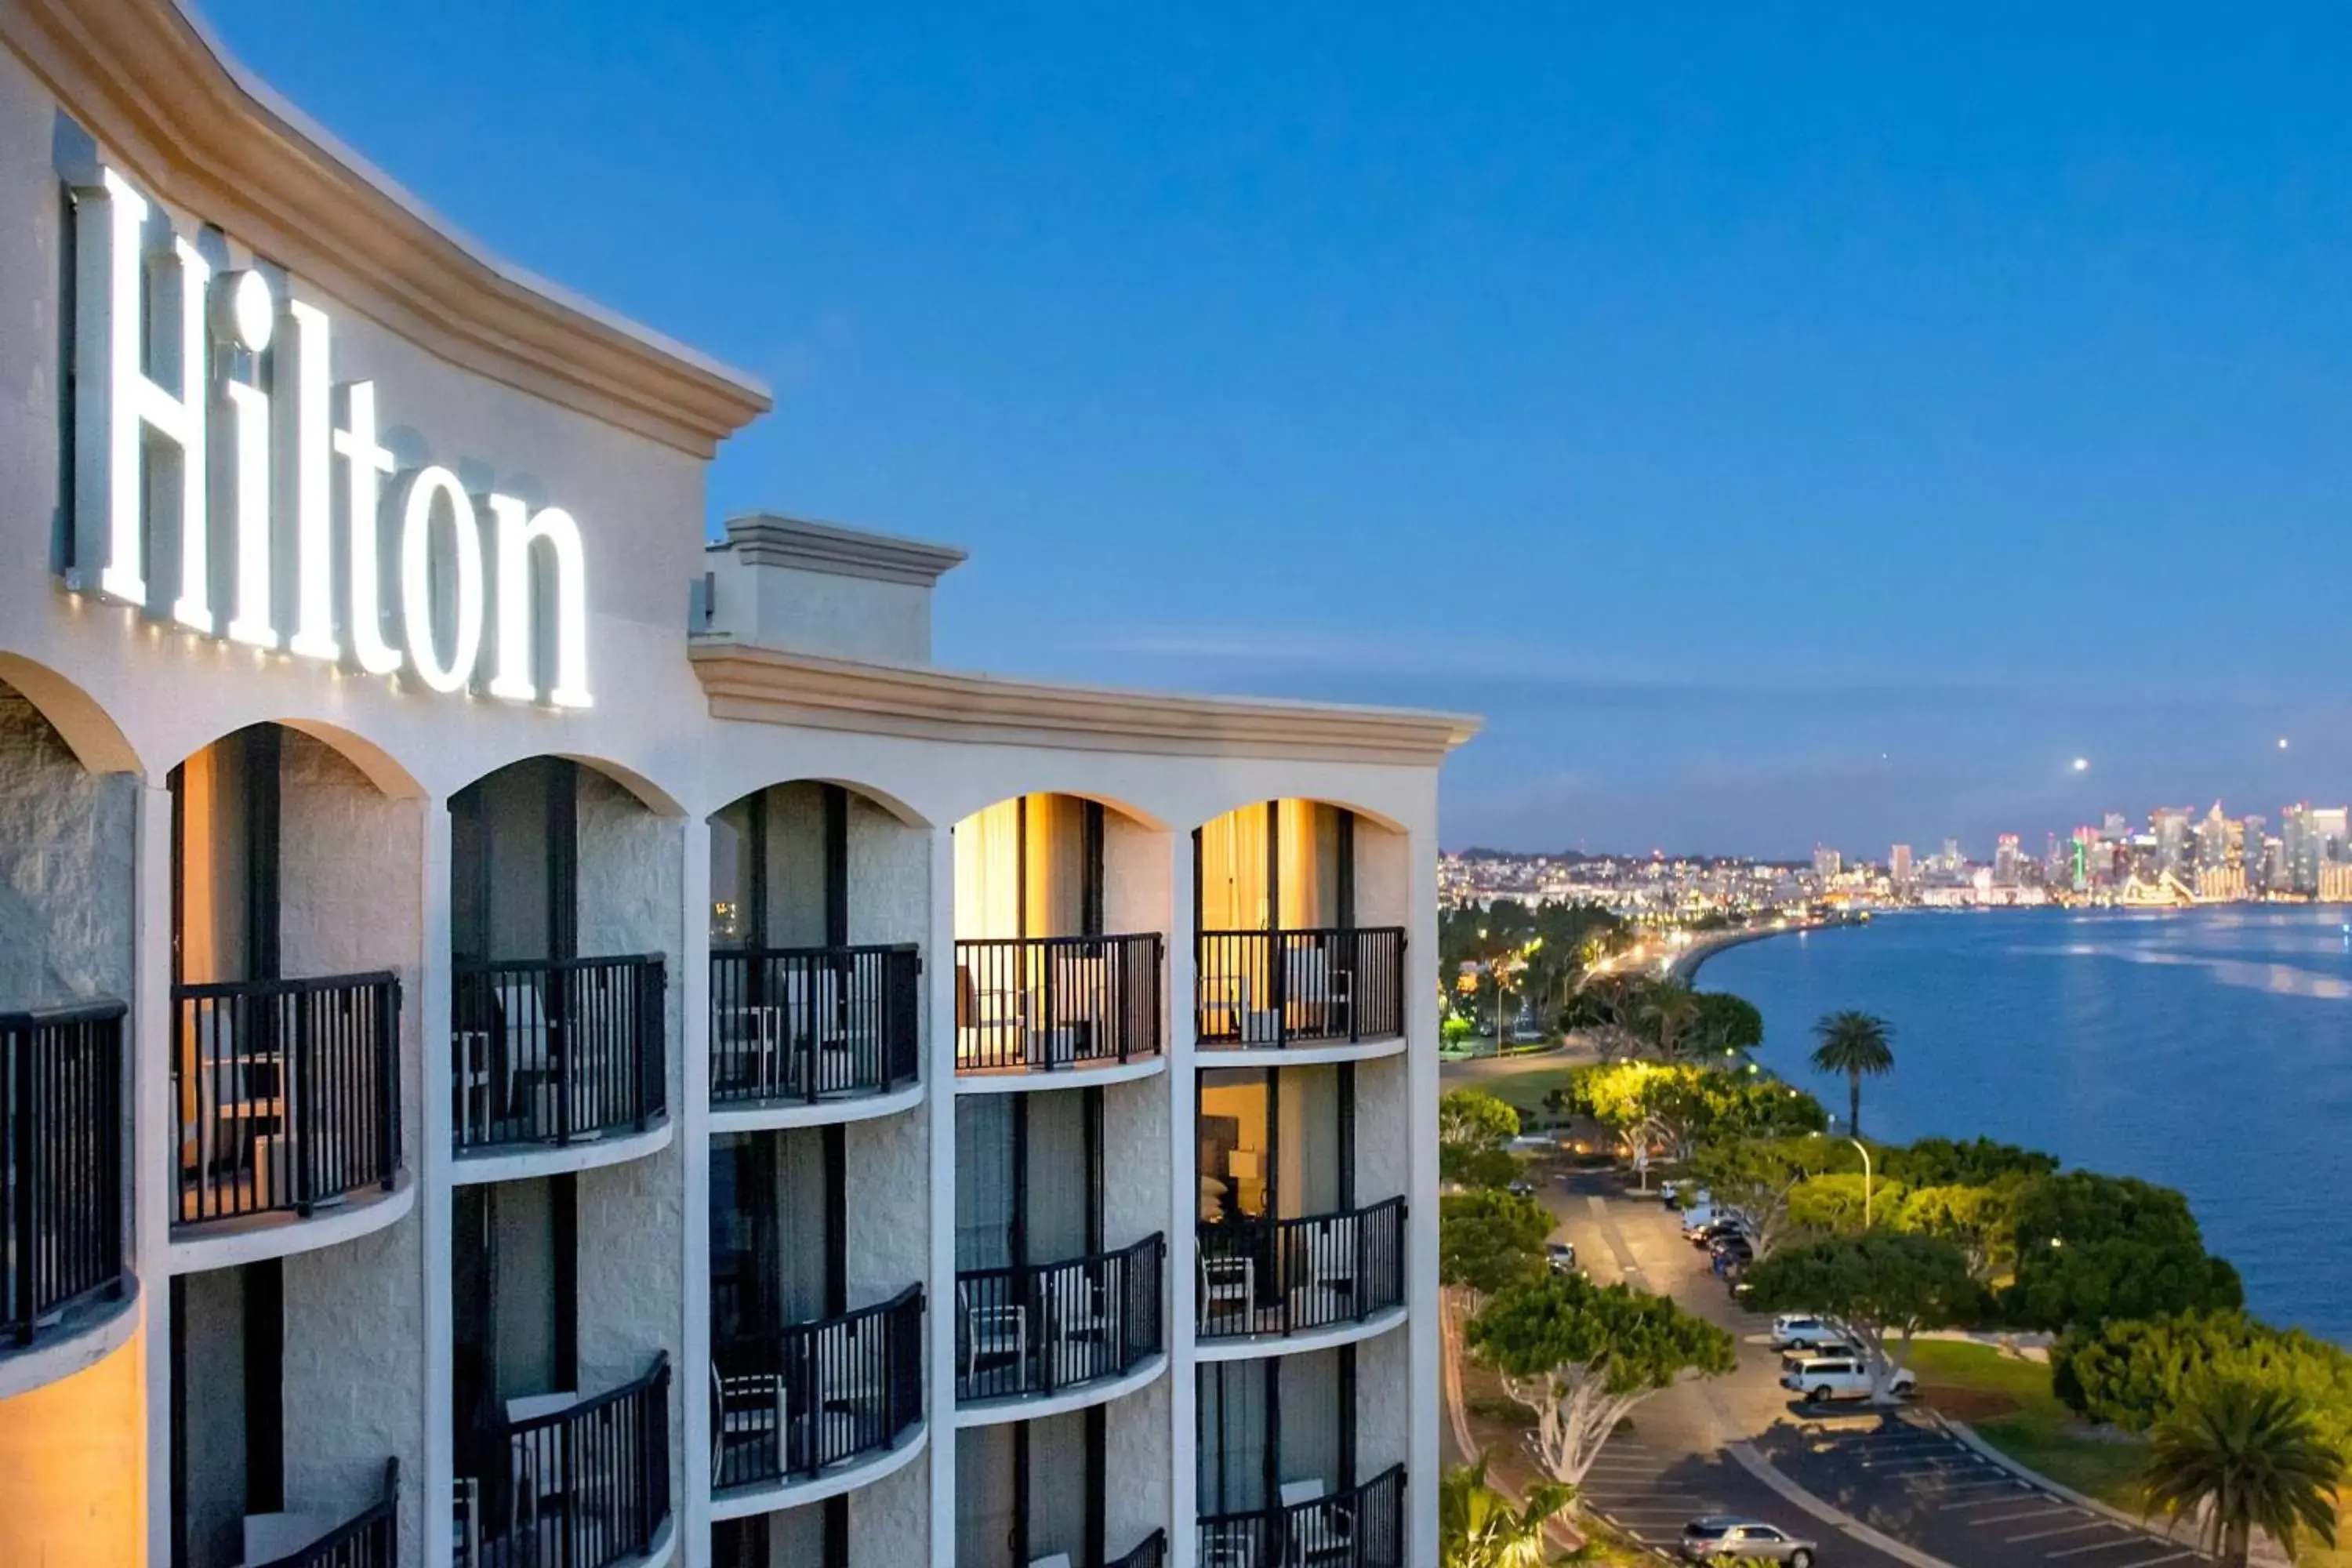 Property building in Hilton San Diego Airport/Harbor Island